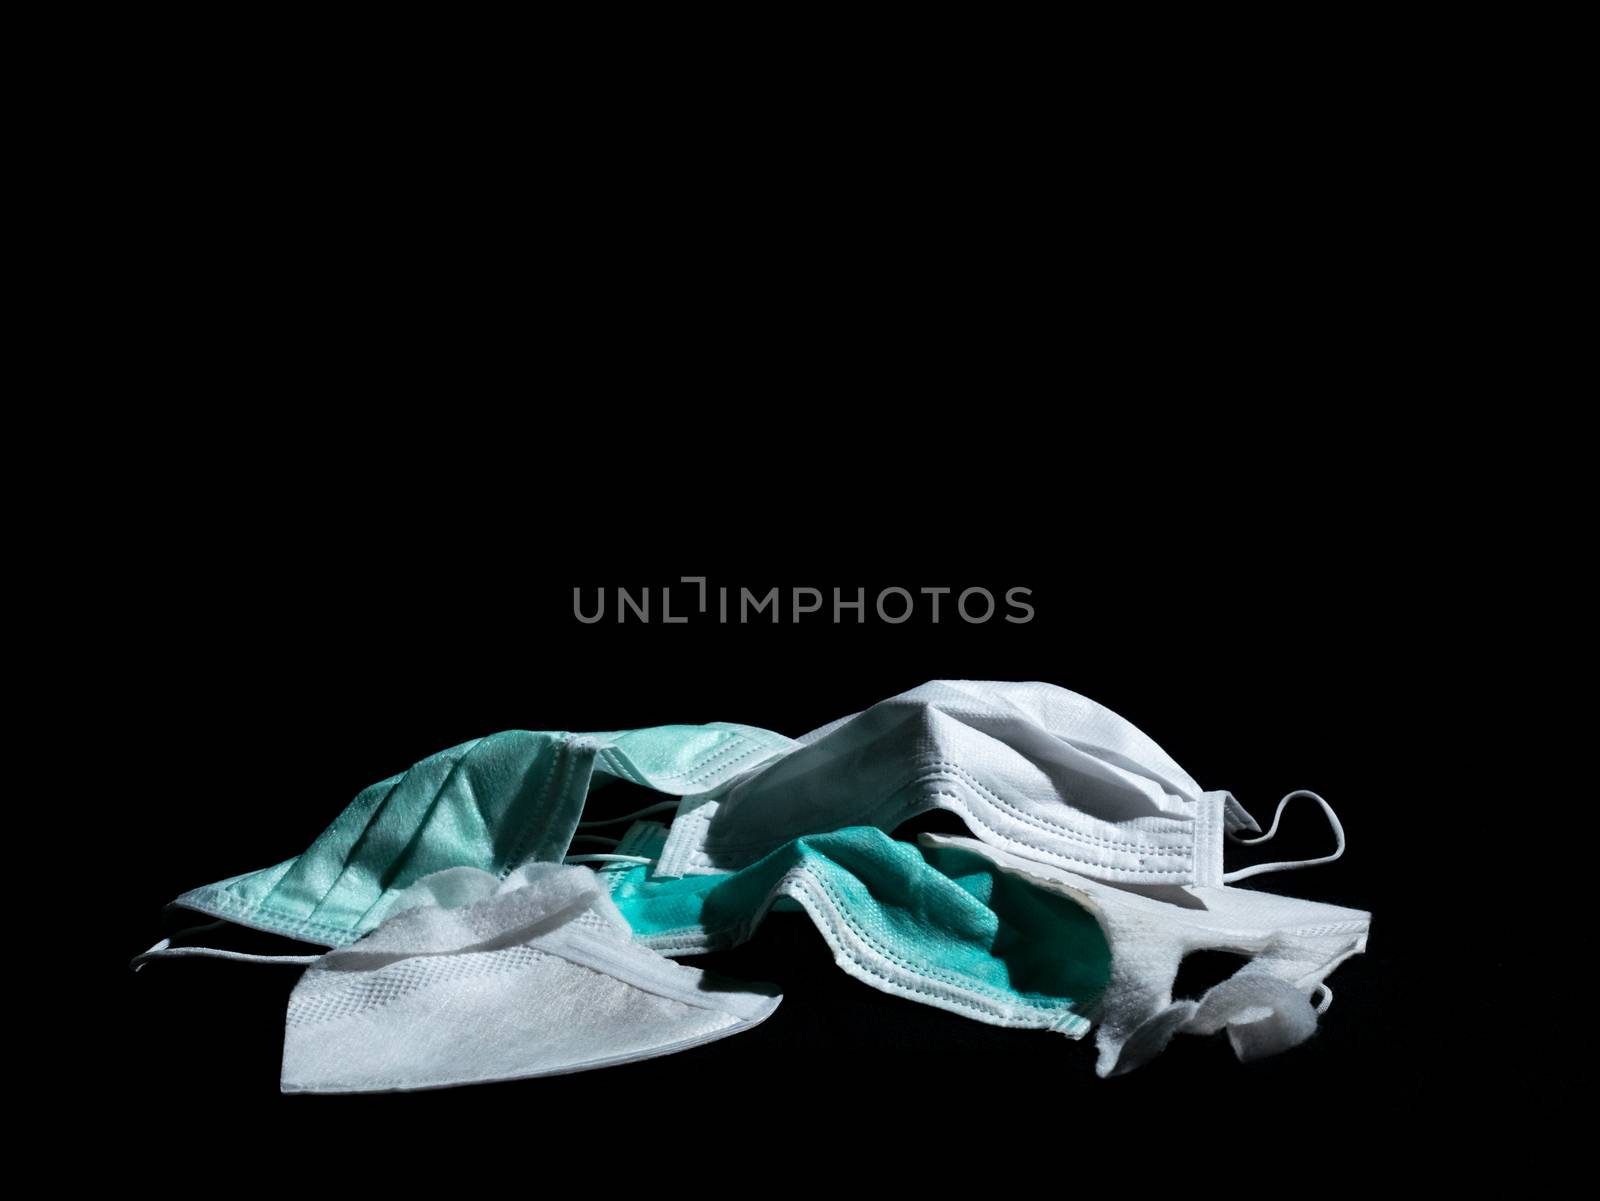 used surgical masks and used PM2.5 masks place on black background with copy space. dark tone. Properly discarded mask concept.